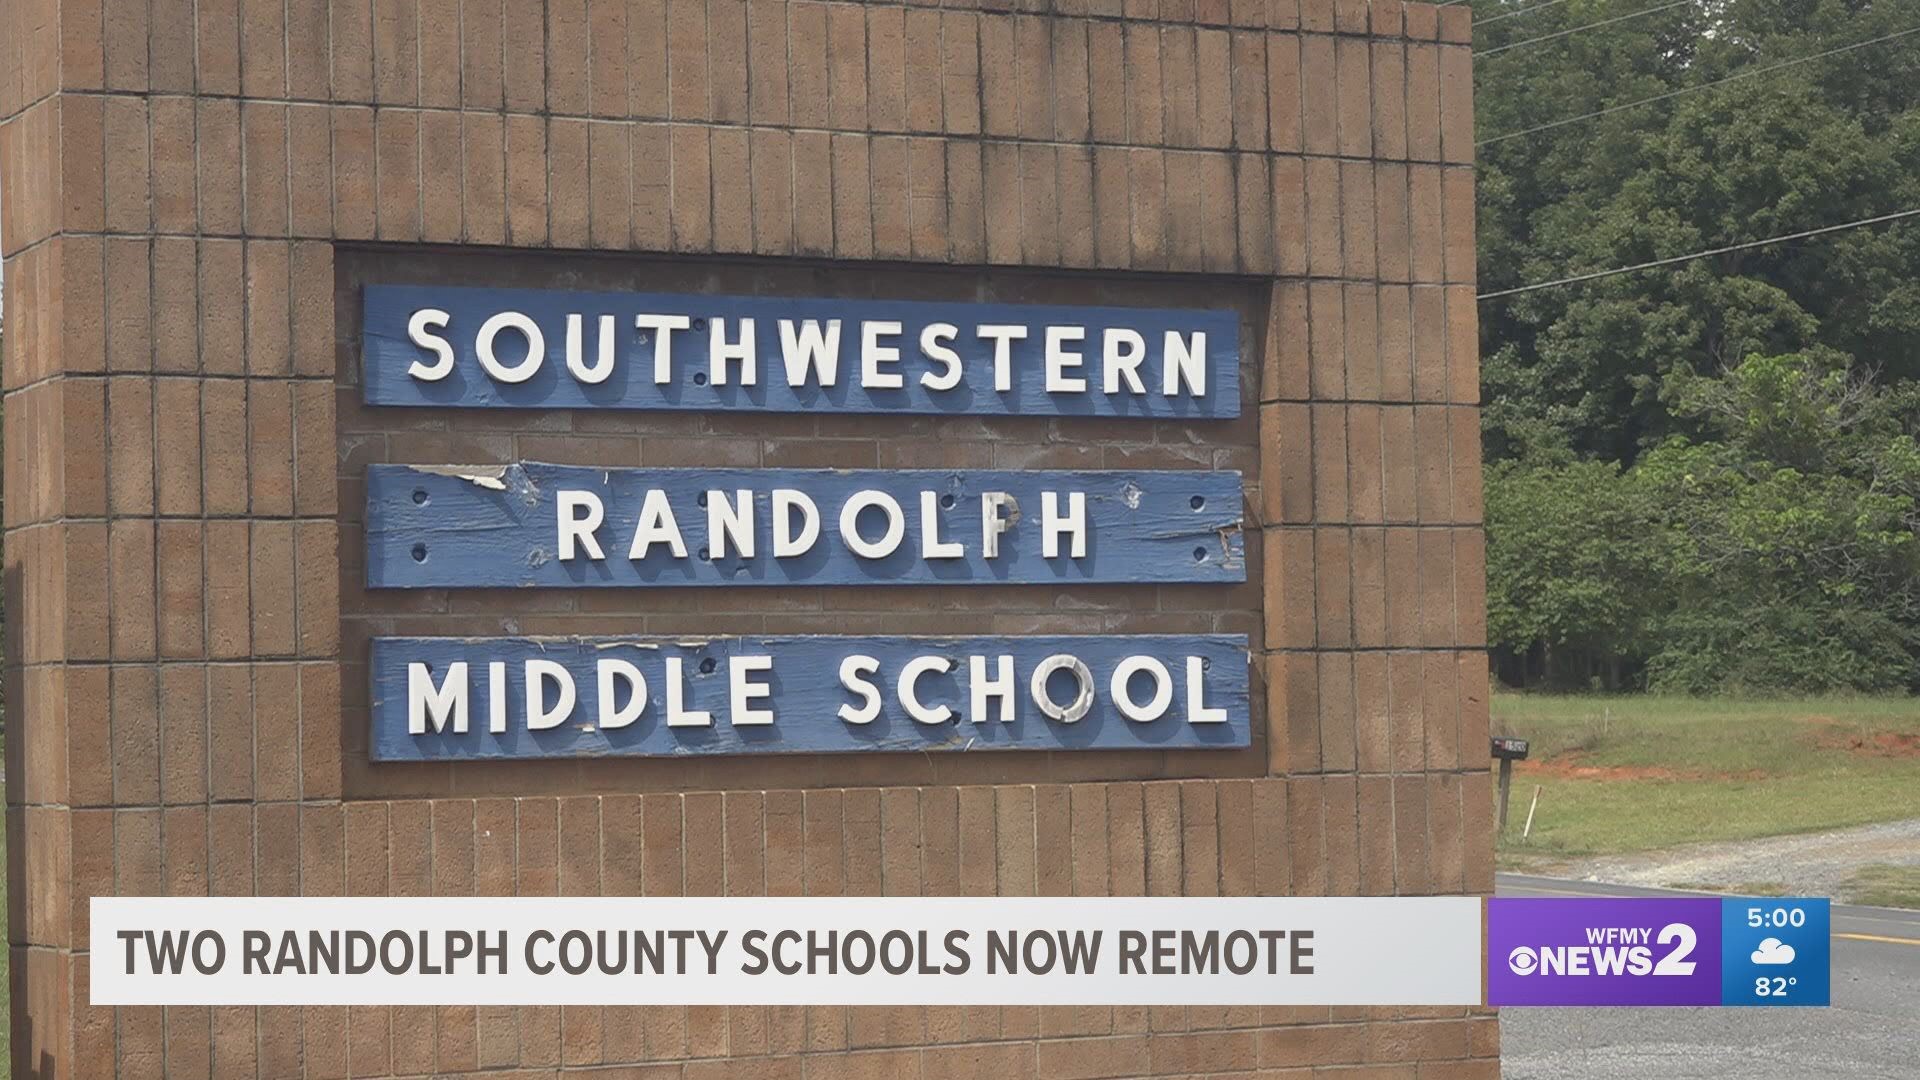 Southwestern Randolph Middle and Eastern Randolph High schools are remote due to COVID-19 issues.